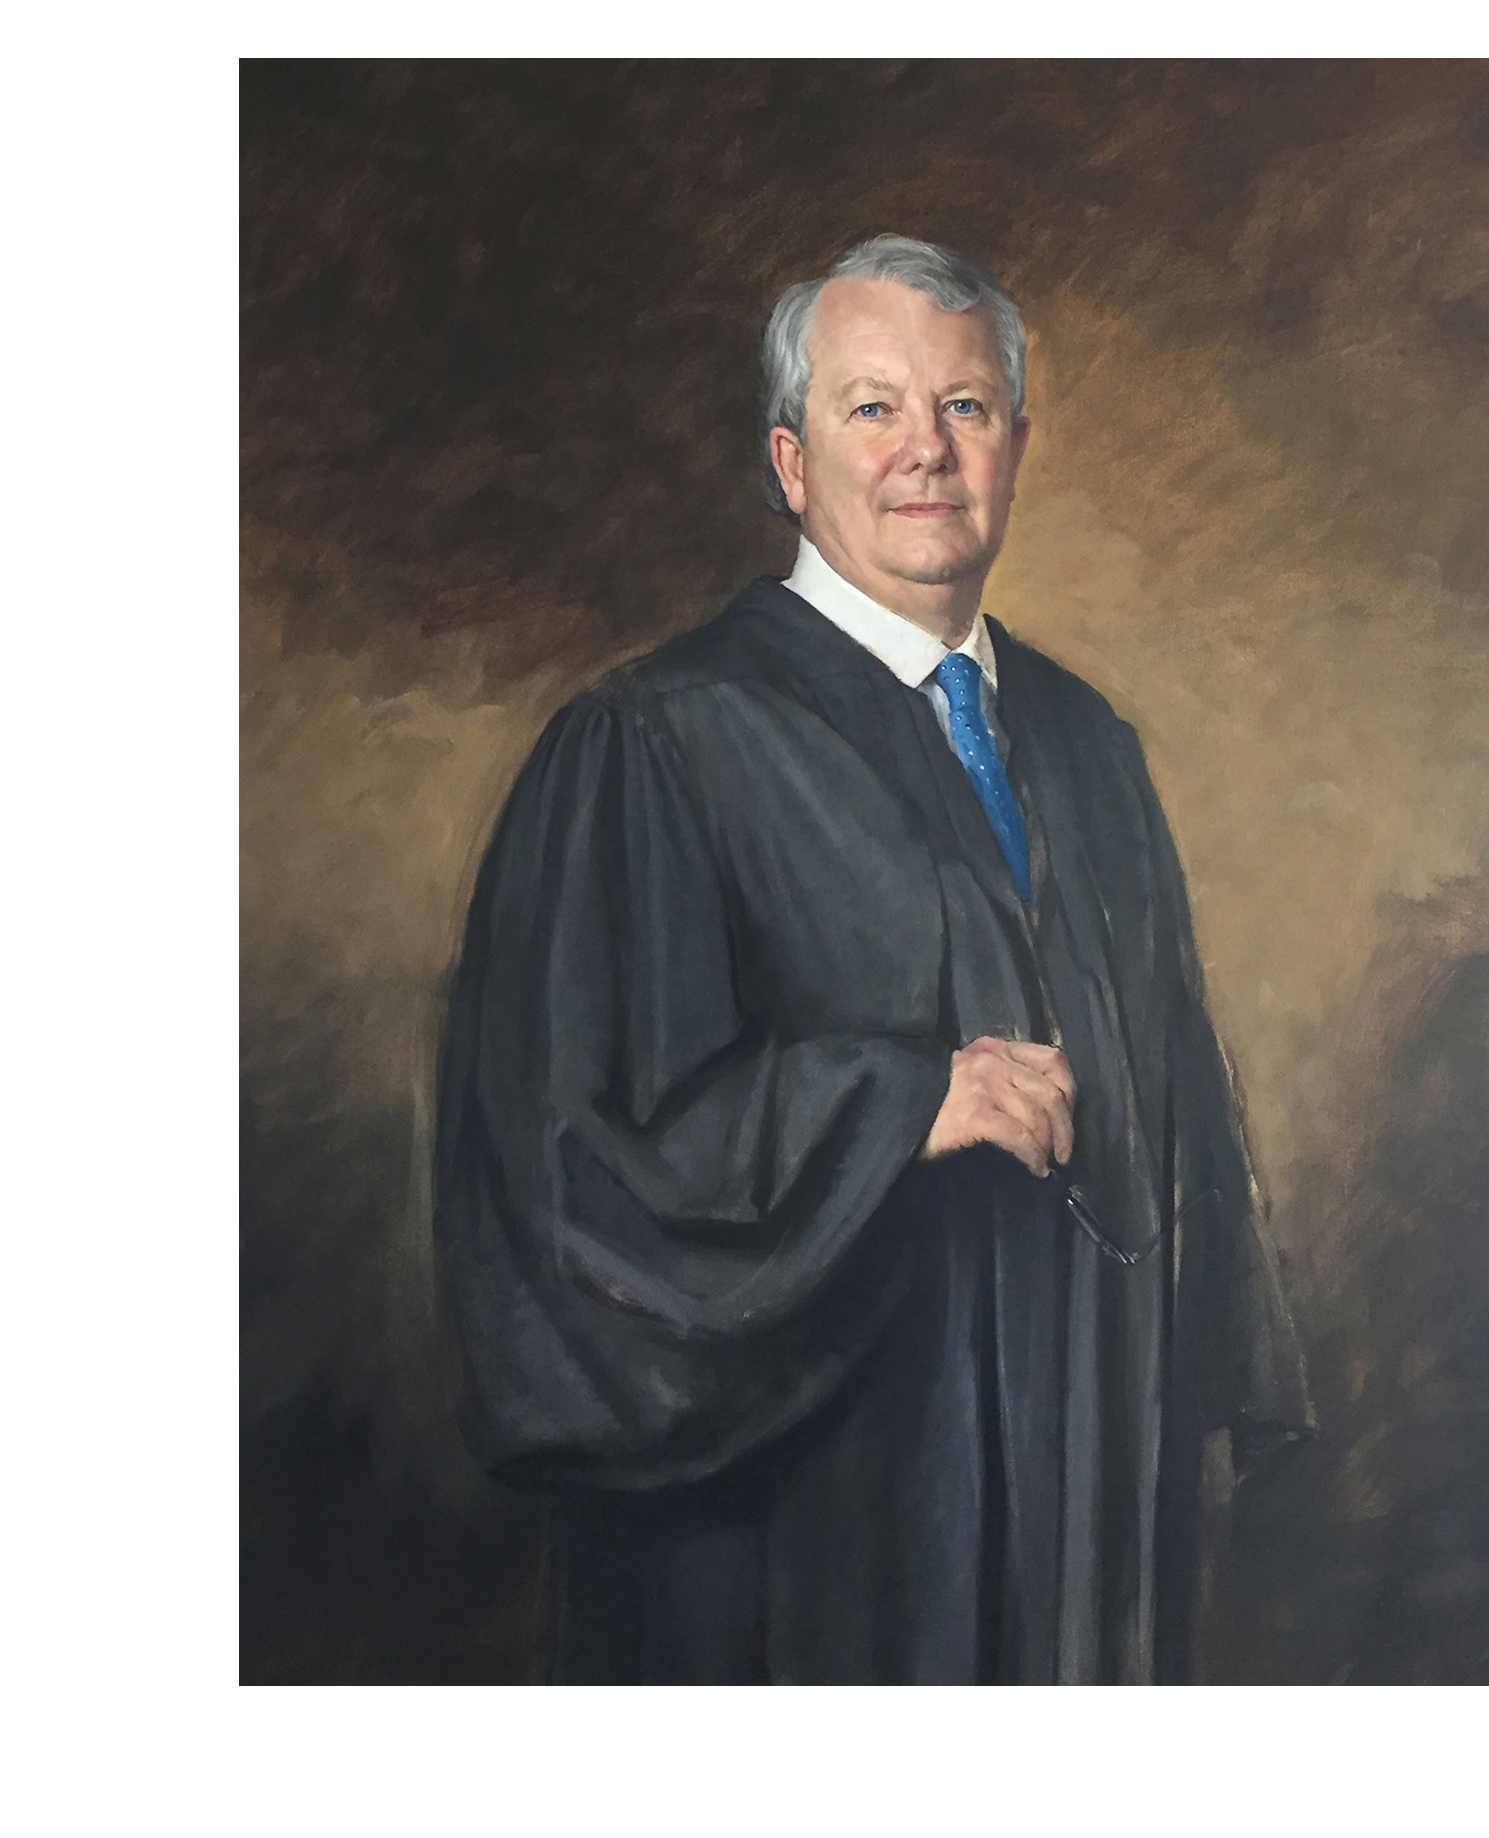 Judge Michael J. Melloy, Eighth Circuit Court of Appeals